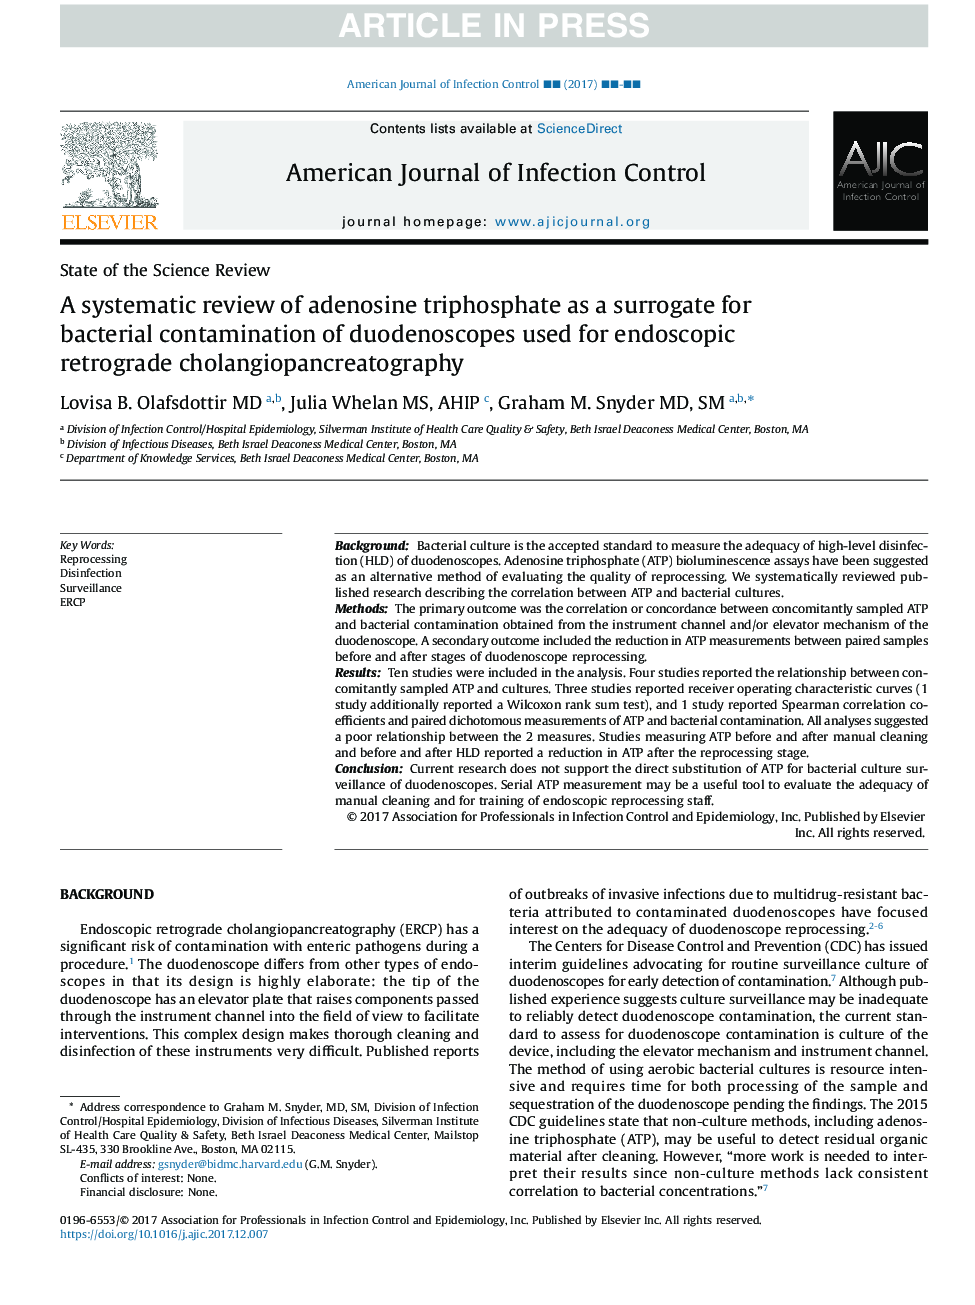 A systematic review of adenosine triphosphate as a surrogate for bacterial contamination of duodenoscopes used for endoscopic retrograde cholangiopancreatography